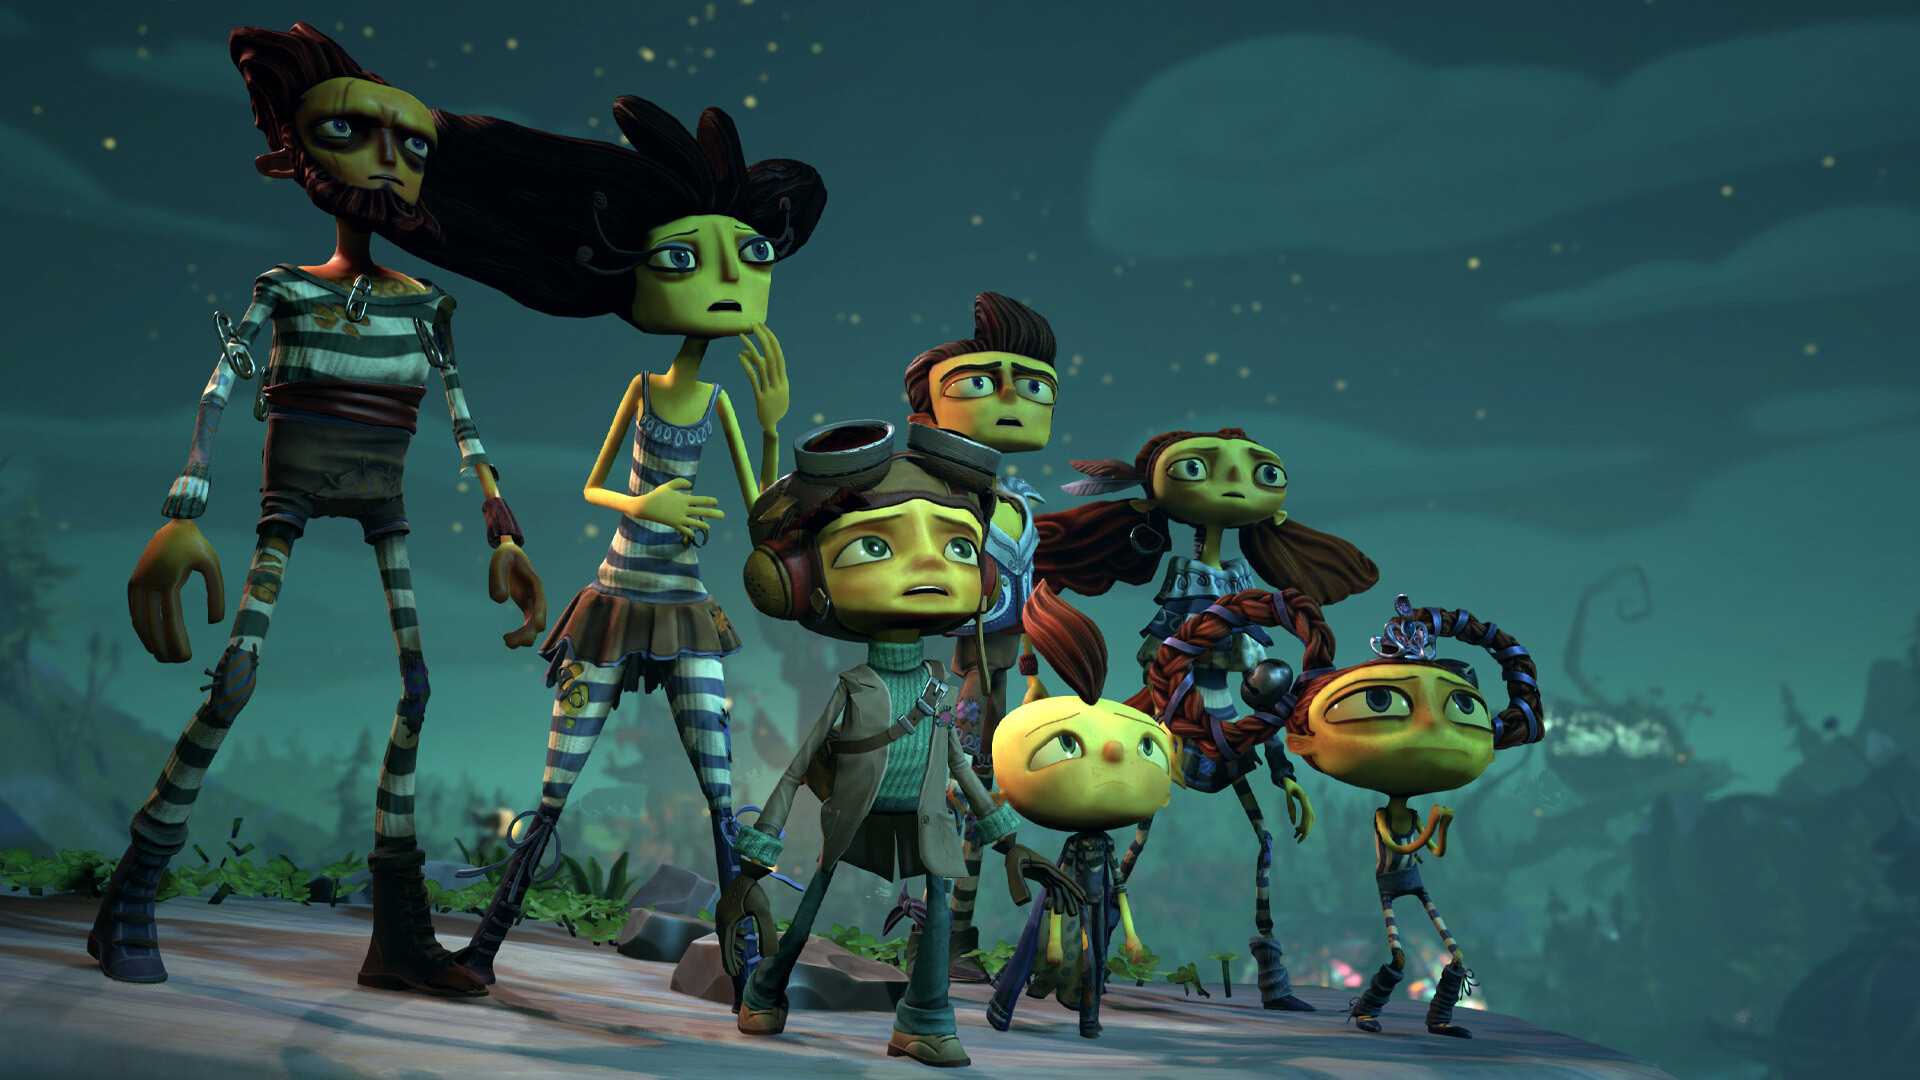 Psychonauts 2: The cinematic story, Fictional characters, A platform game. 1920x1080 Full HD Background.